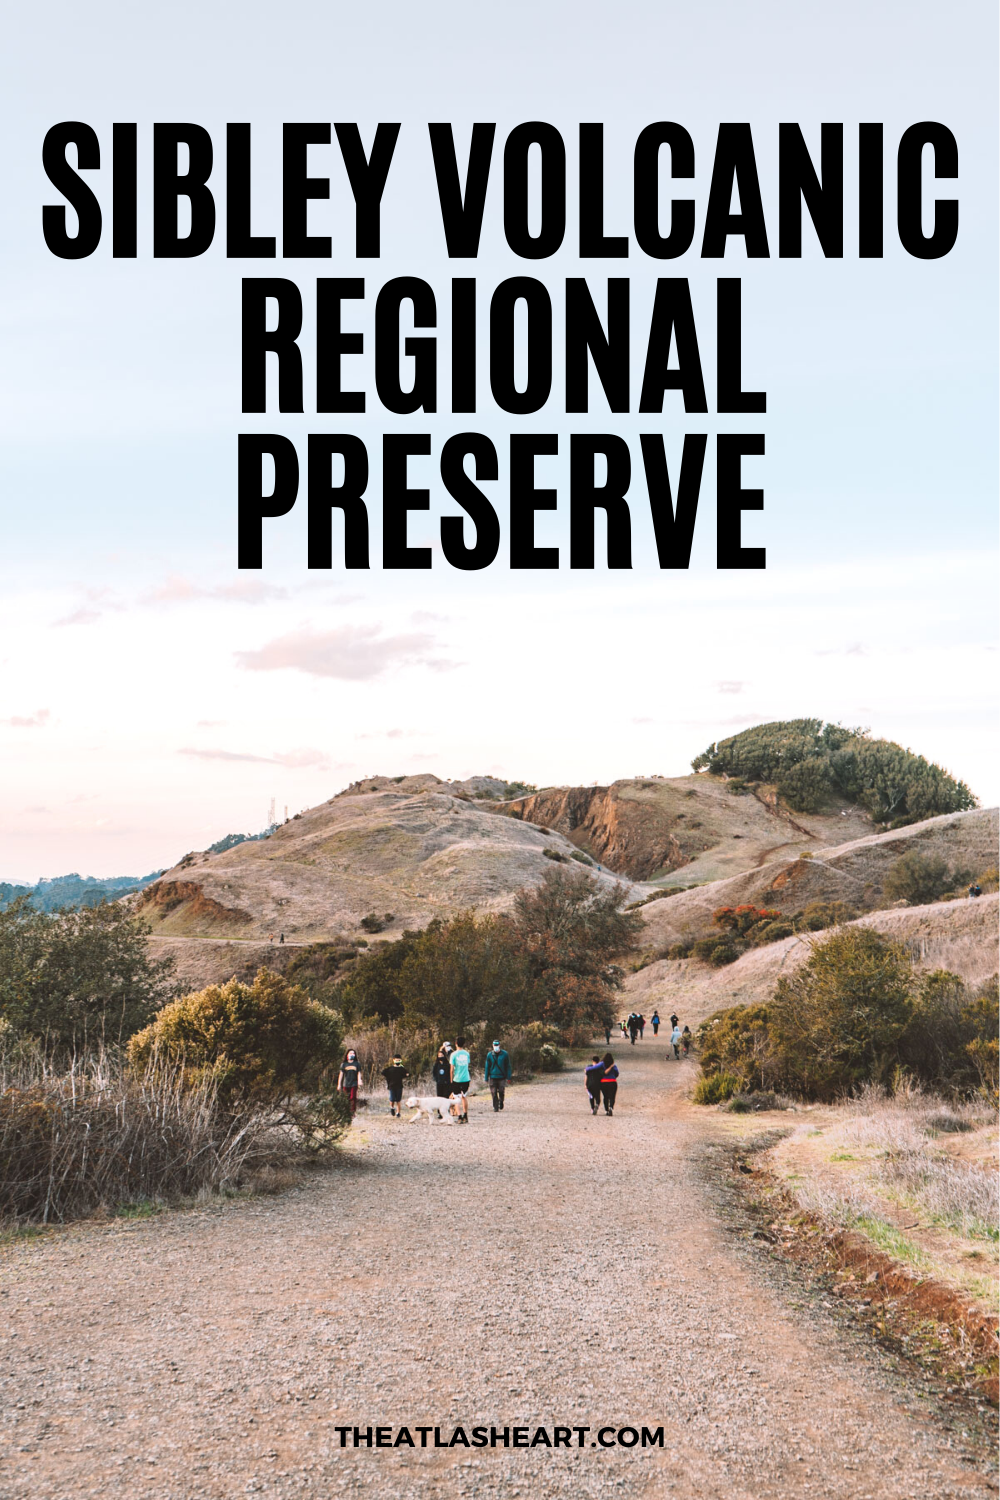 Sibley Volcanic Regional Preserve: What to Know Before You Go